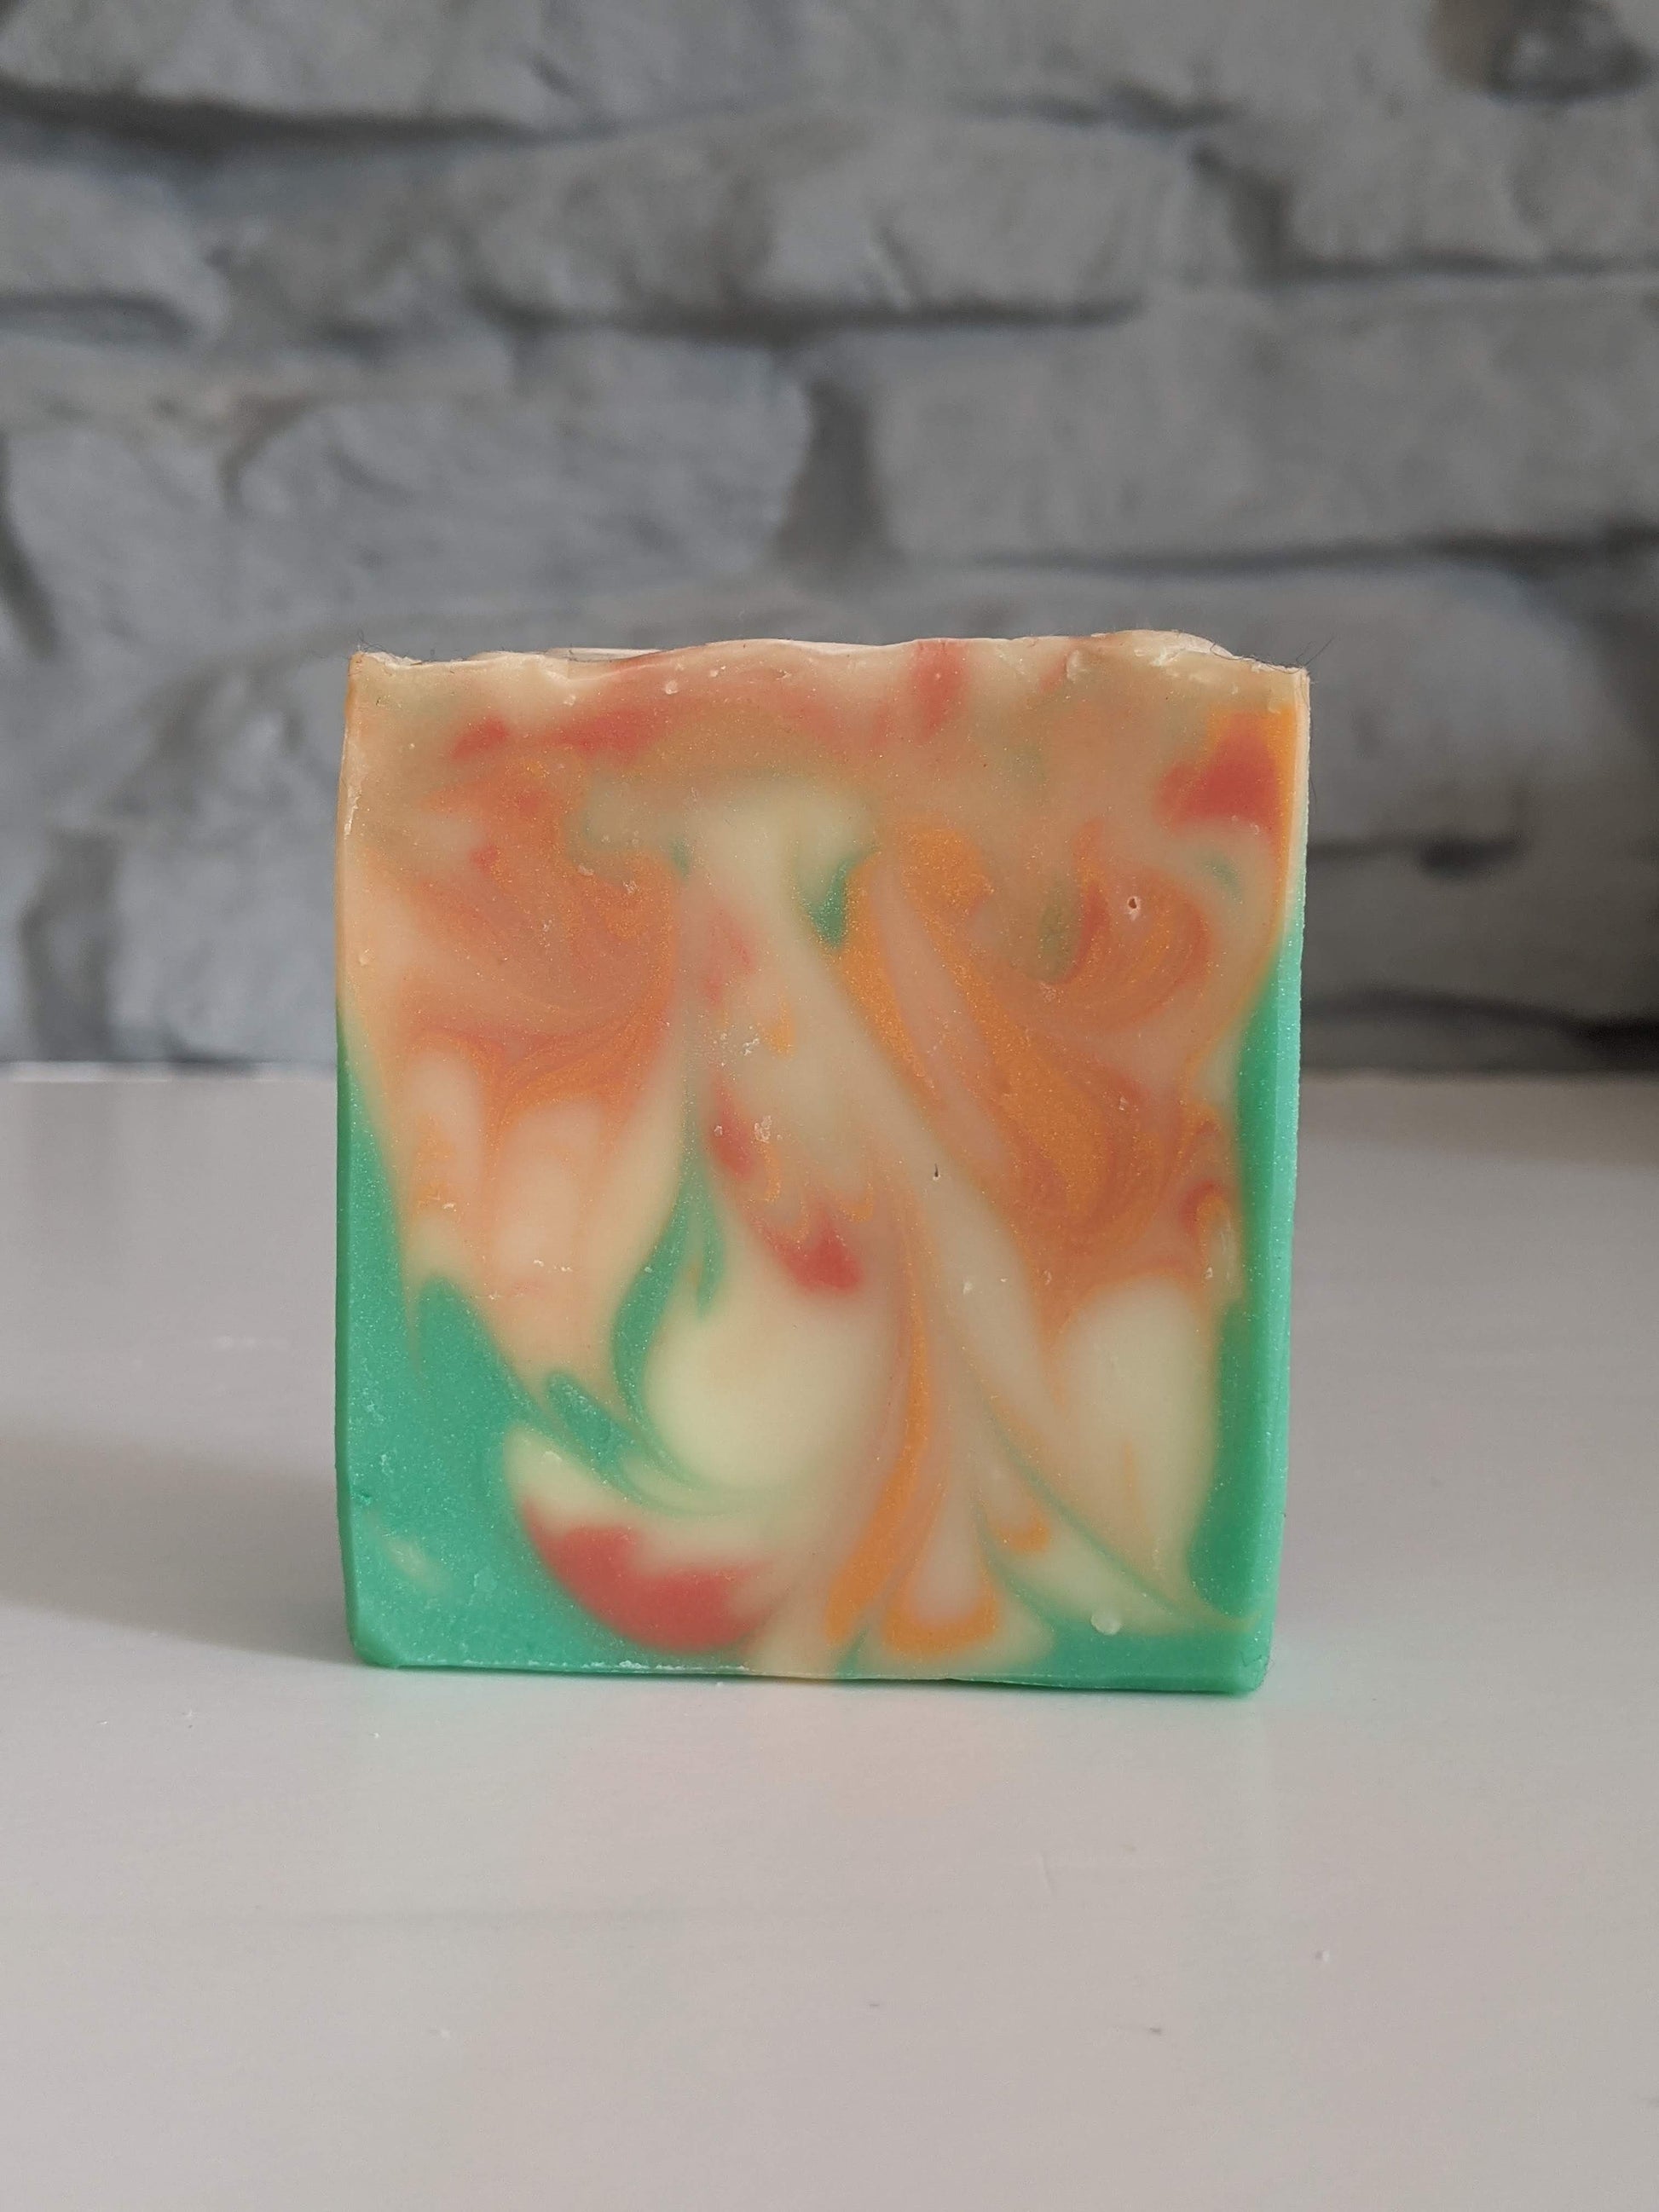 Soul Sister is a bright and swirly soap with greens, orange and red.